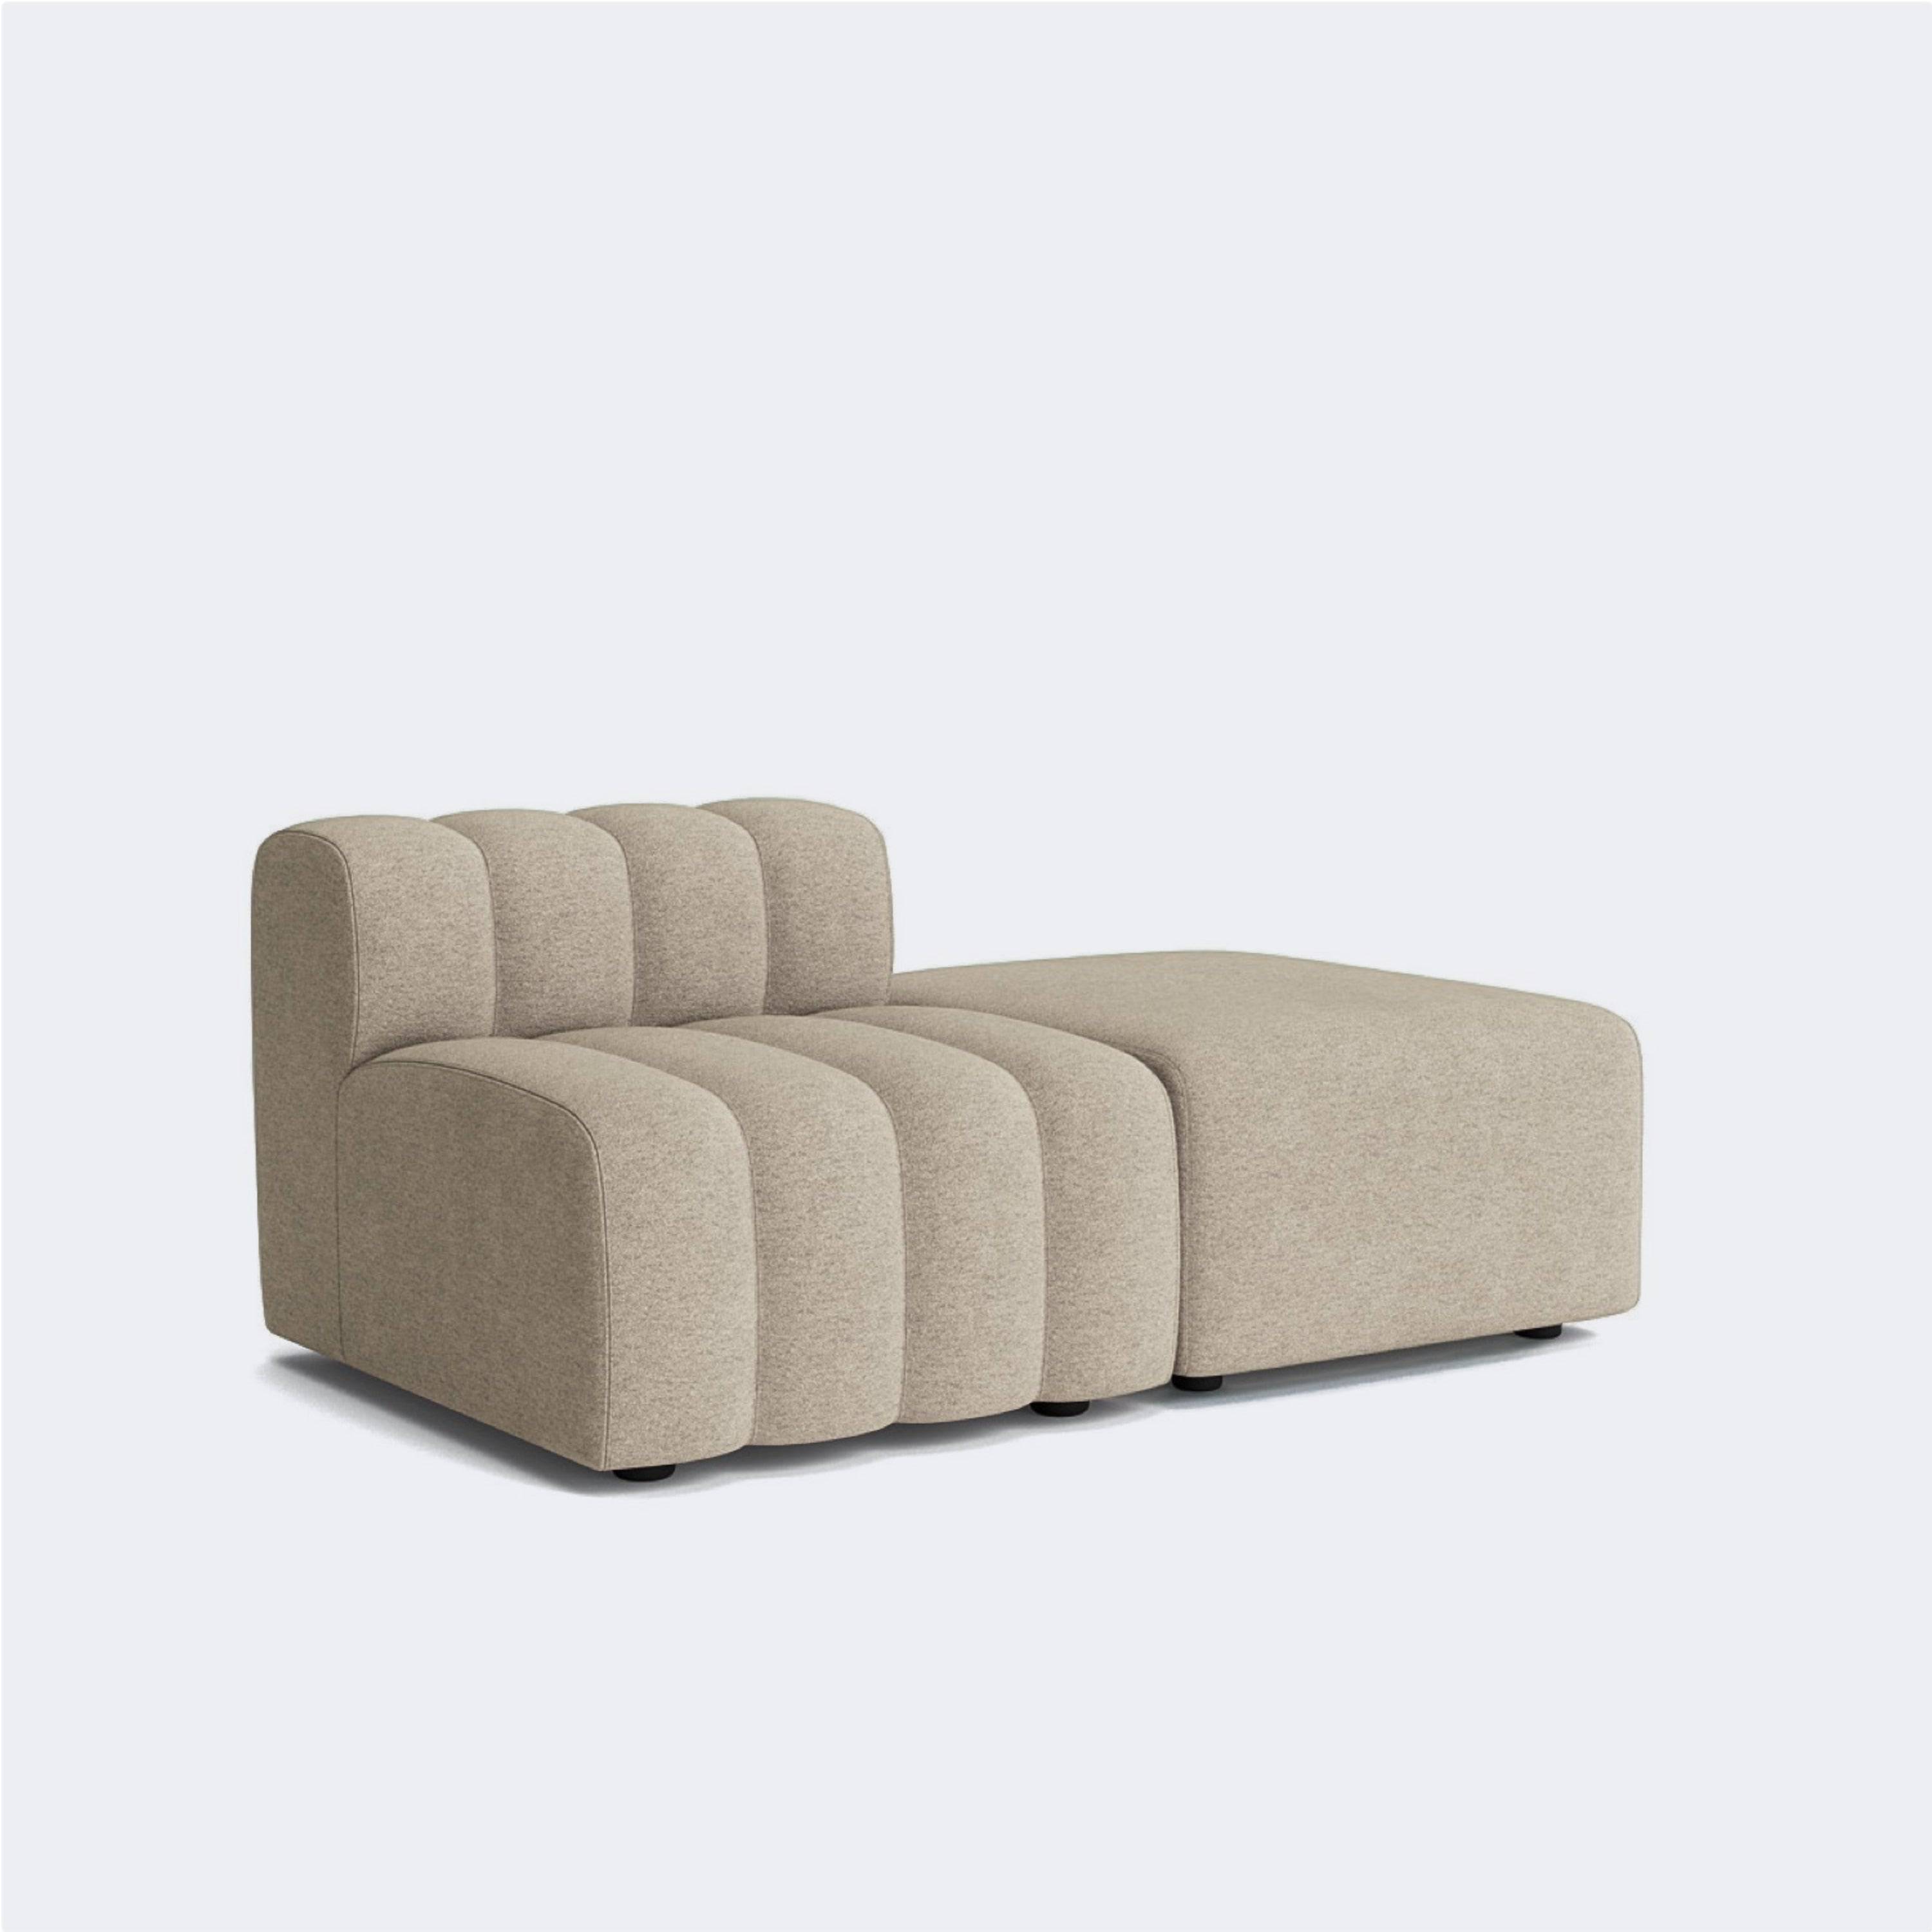 Norr11 Studio 2 Made To Order (8-10 Weeks) Barnum Col 3 - KANSO#Upholstery_Barnum Col 3